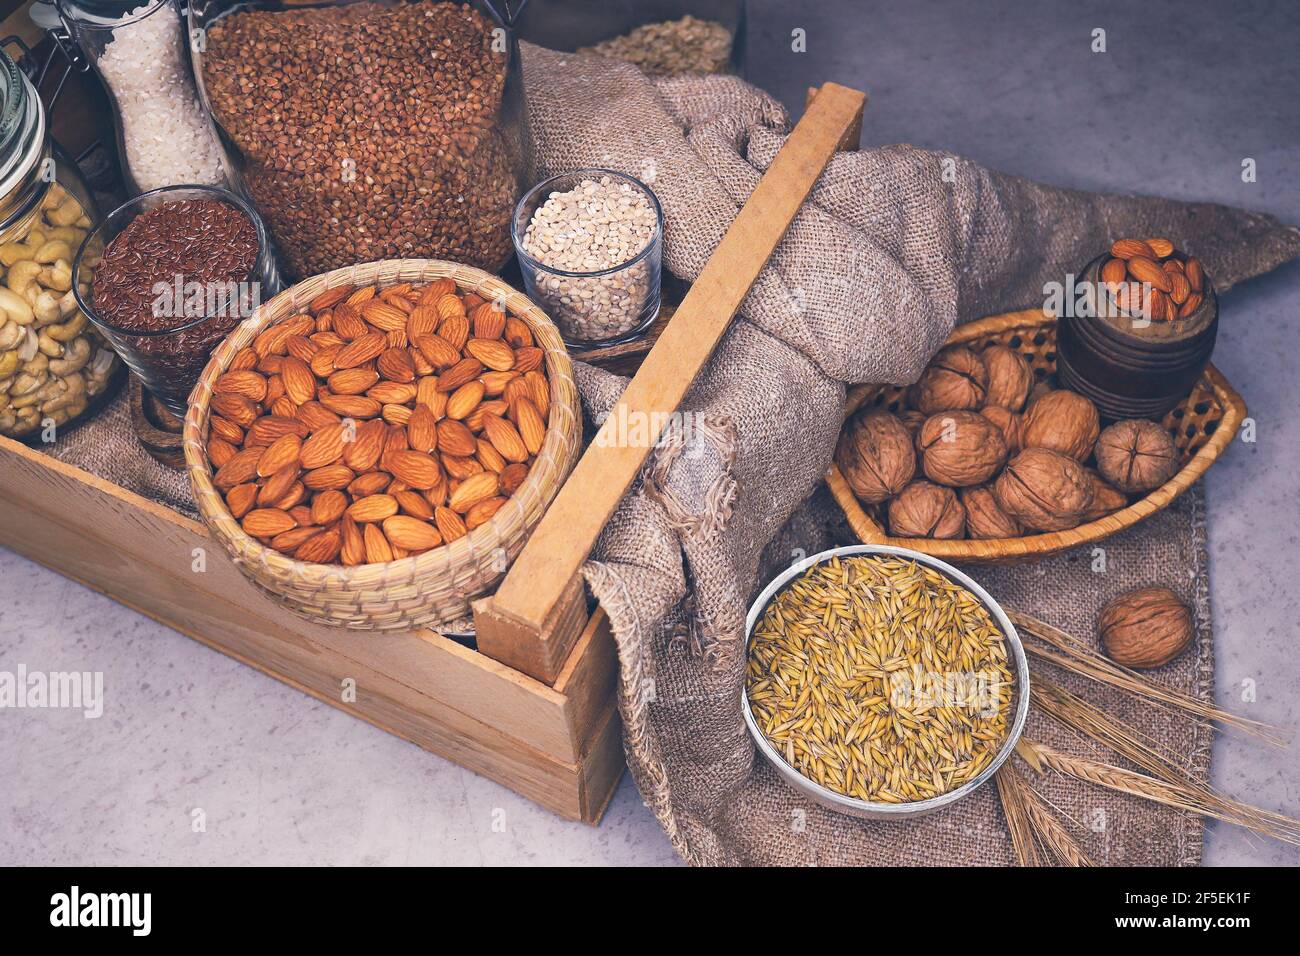 Variety of cereals and nuts on table. Walnuts, almonds, wheat grains and  ears of corn in cans and baskets. Alternative sources of protein and  vitamins Stock Photo - Alamy